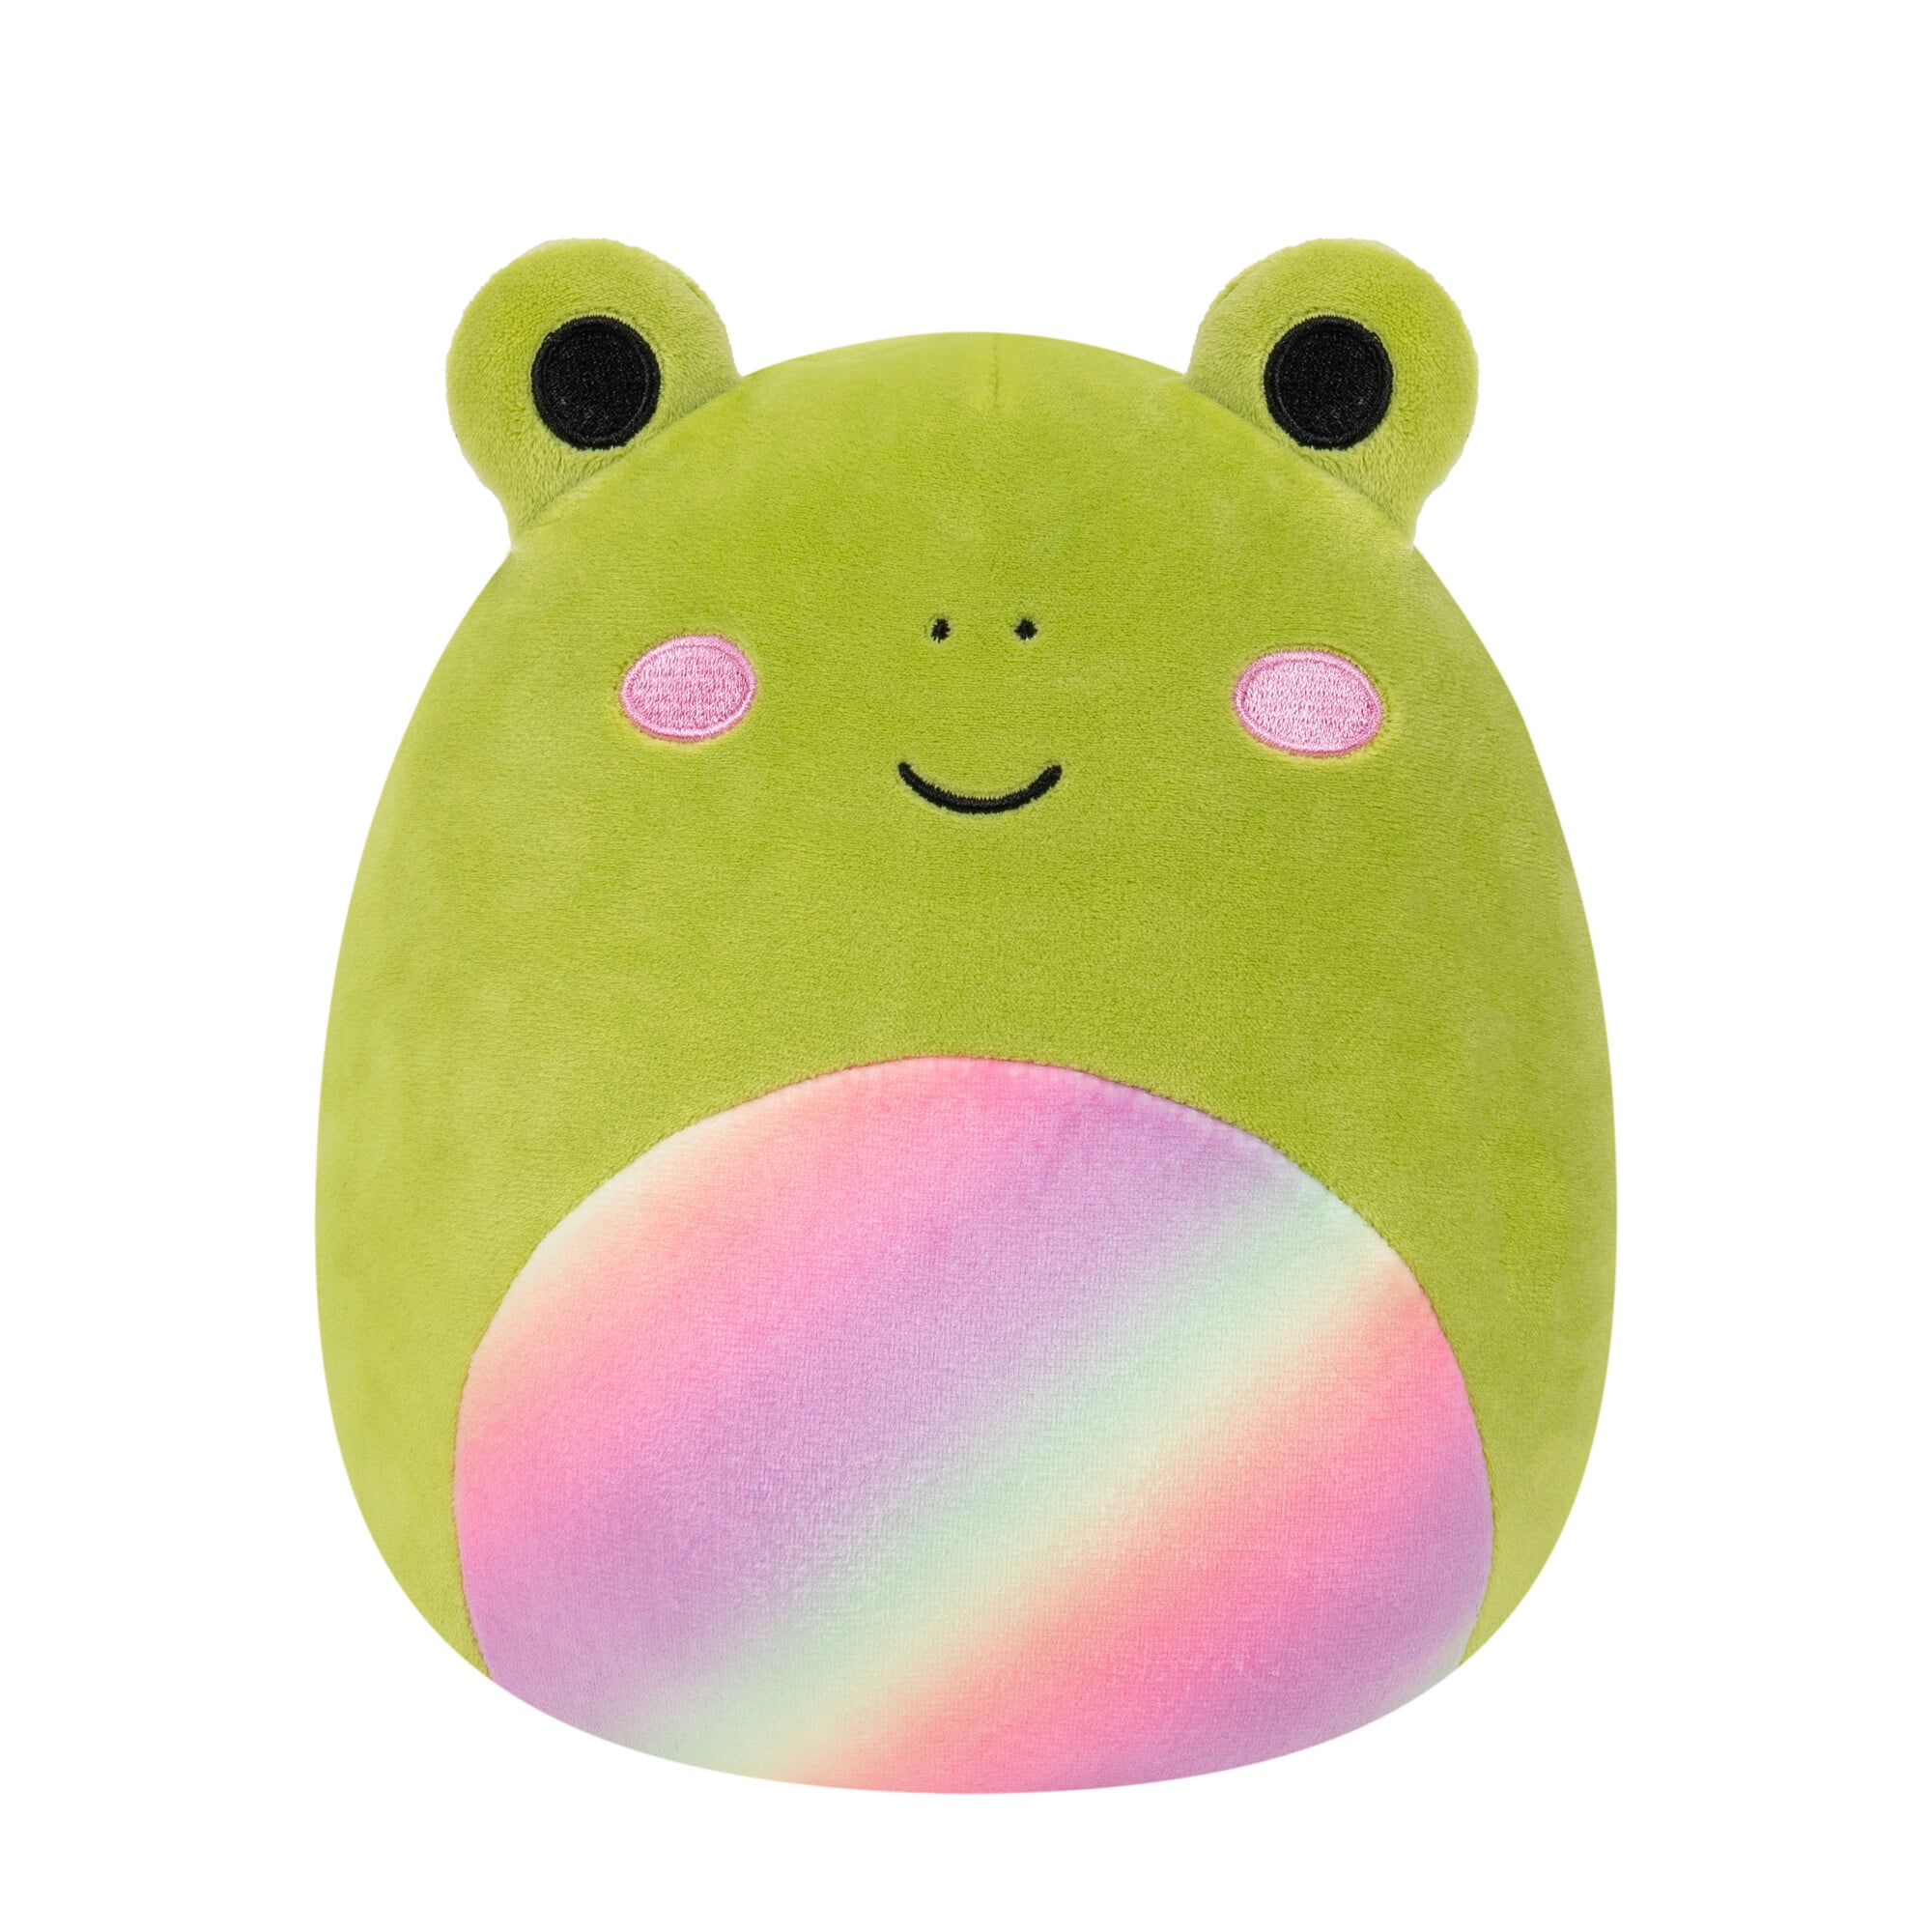 Squishmallows 8 Doxl The Rainbow Frog Stuffed Animal Toy Green